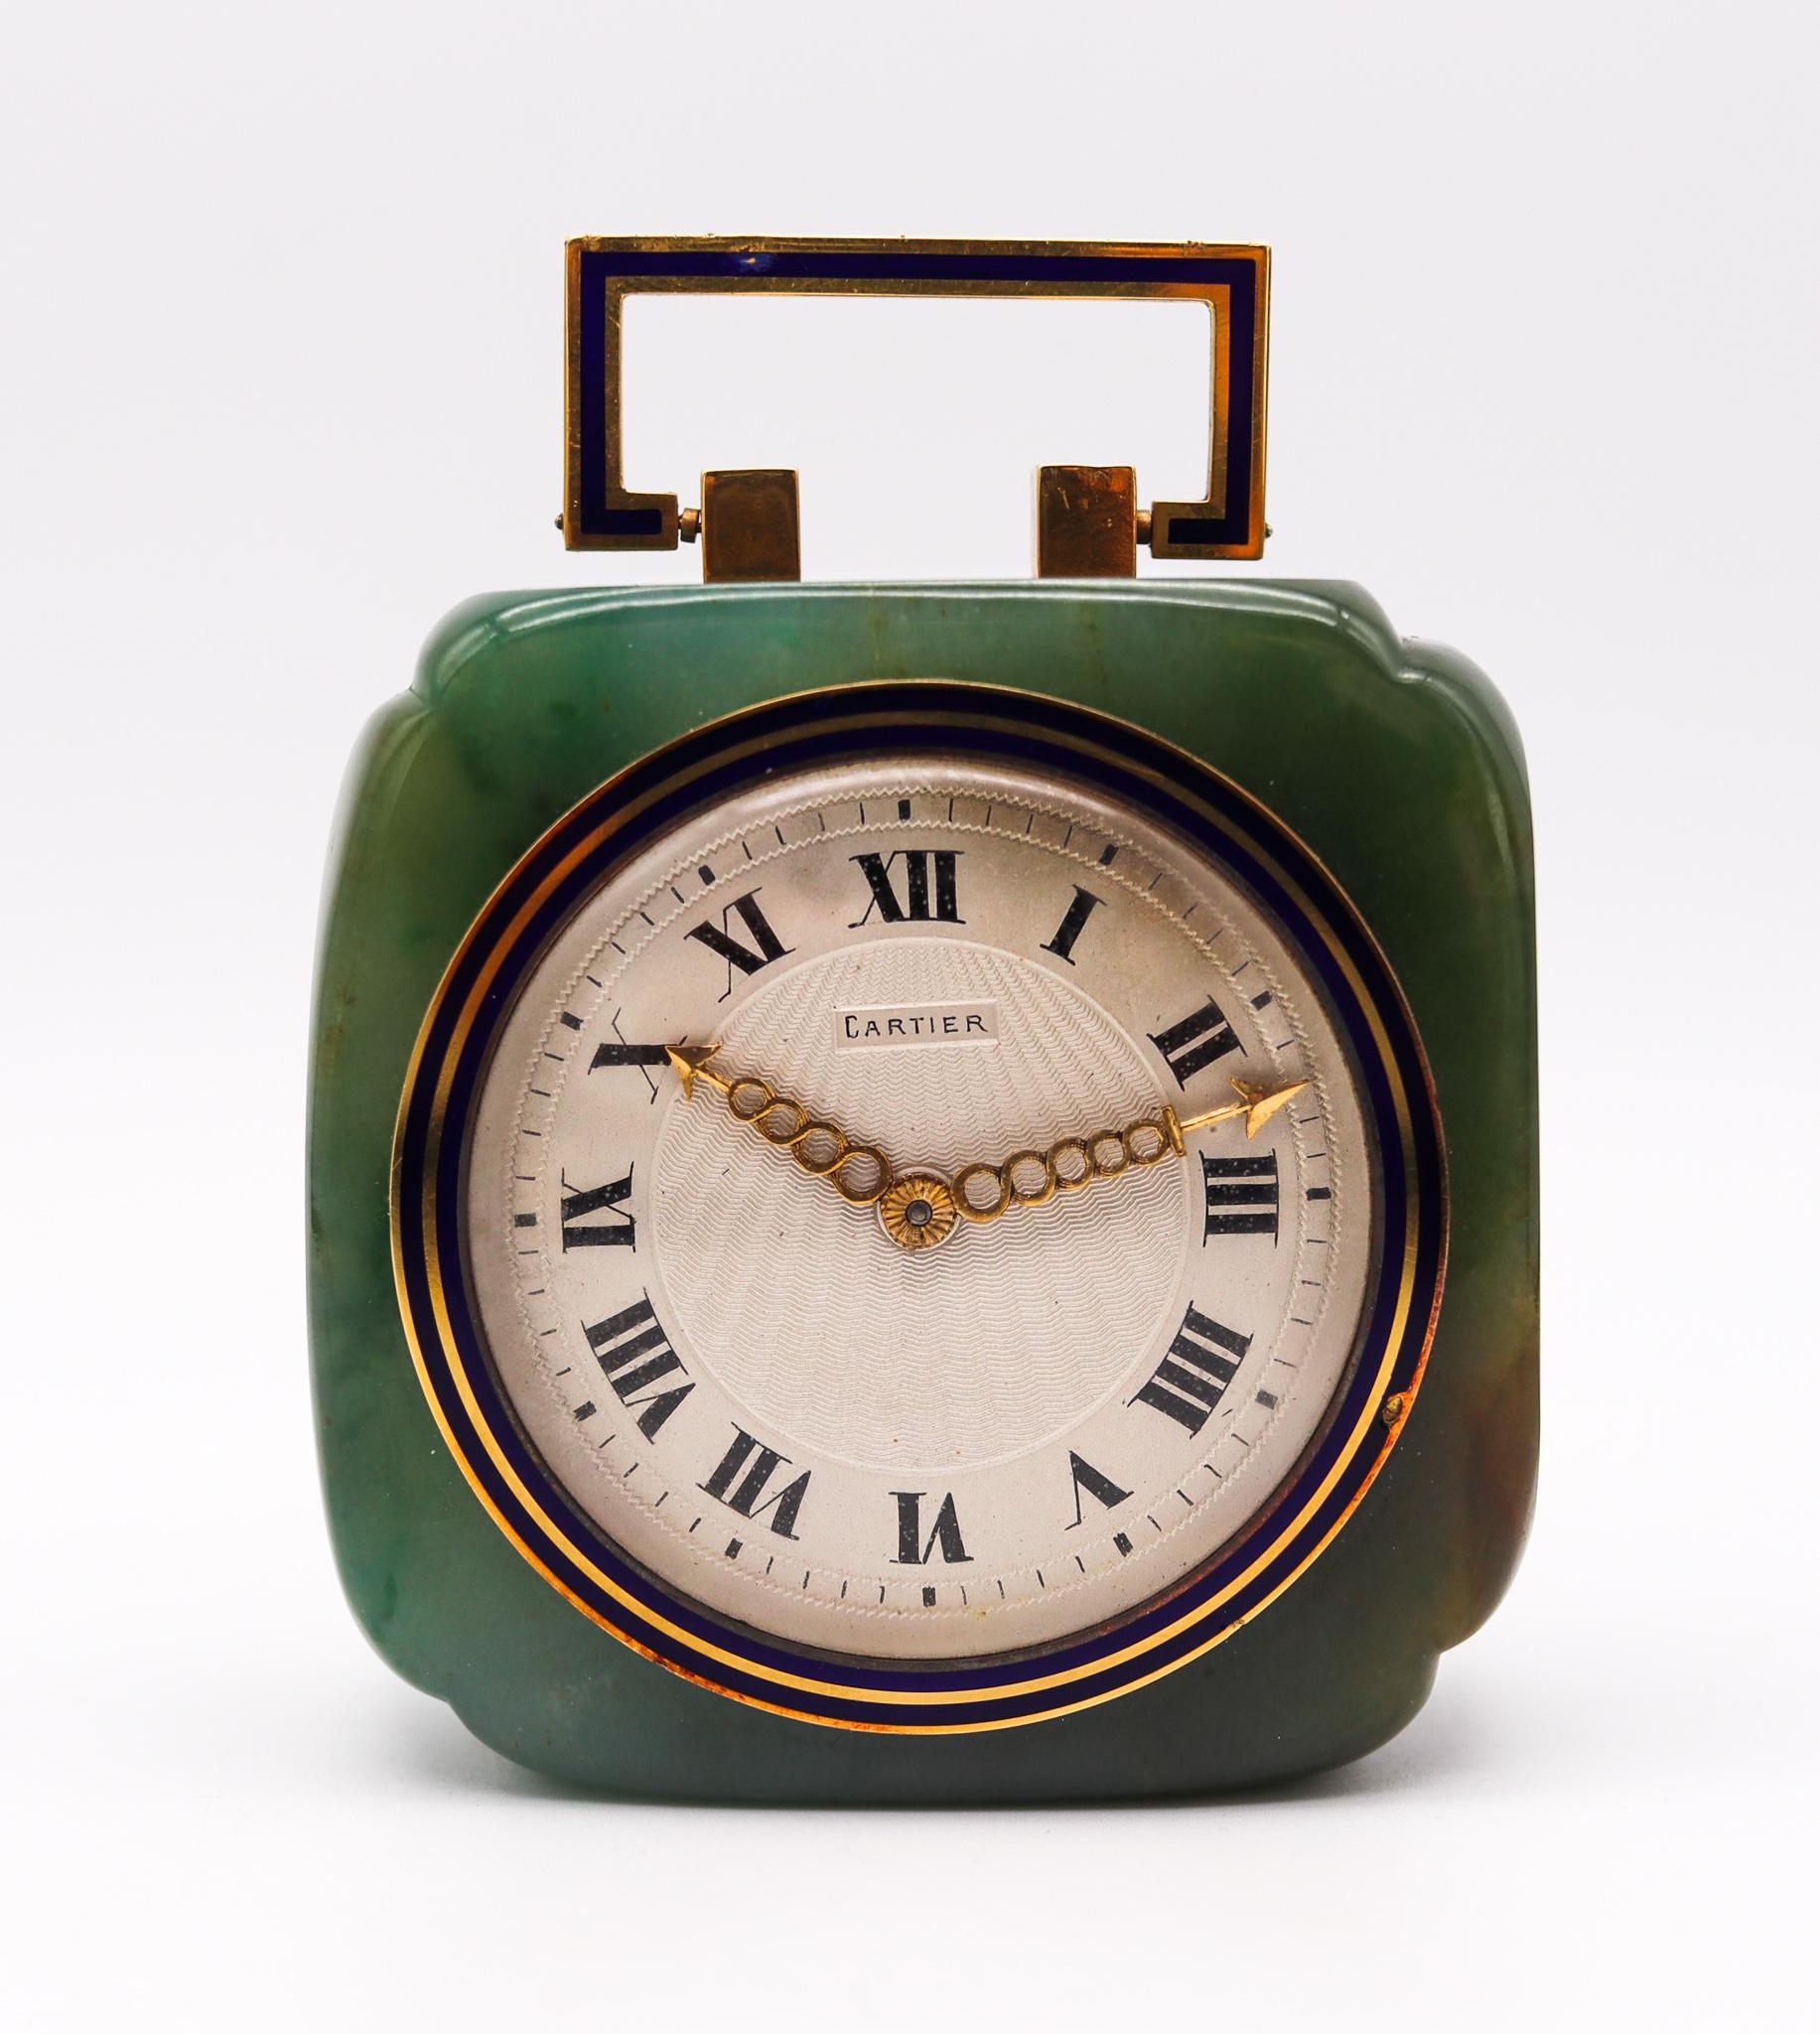 A desk clock designed by Cartier.

An impressive and beautiful desk clock, created in Paris France by the house of Cartier, during the art deco period, back in the 1920. This stunning rare piece has been designed with Chinoiserie patterns and